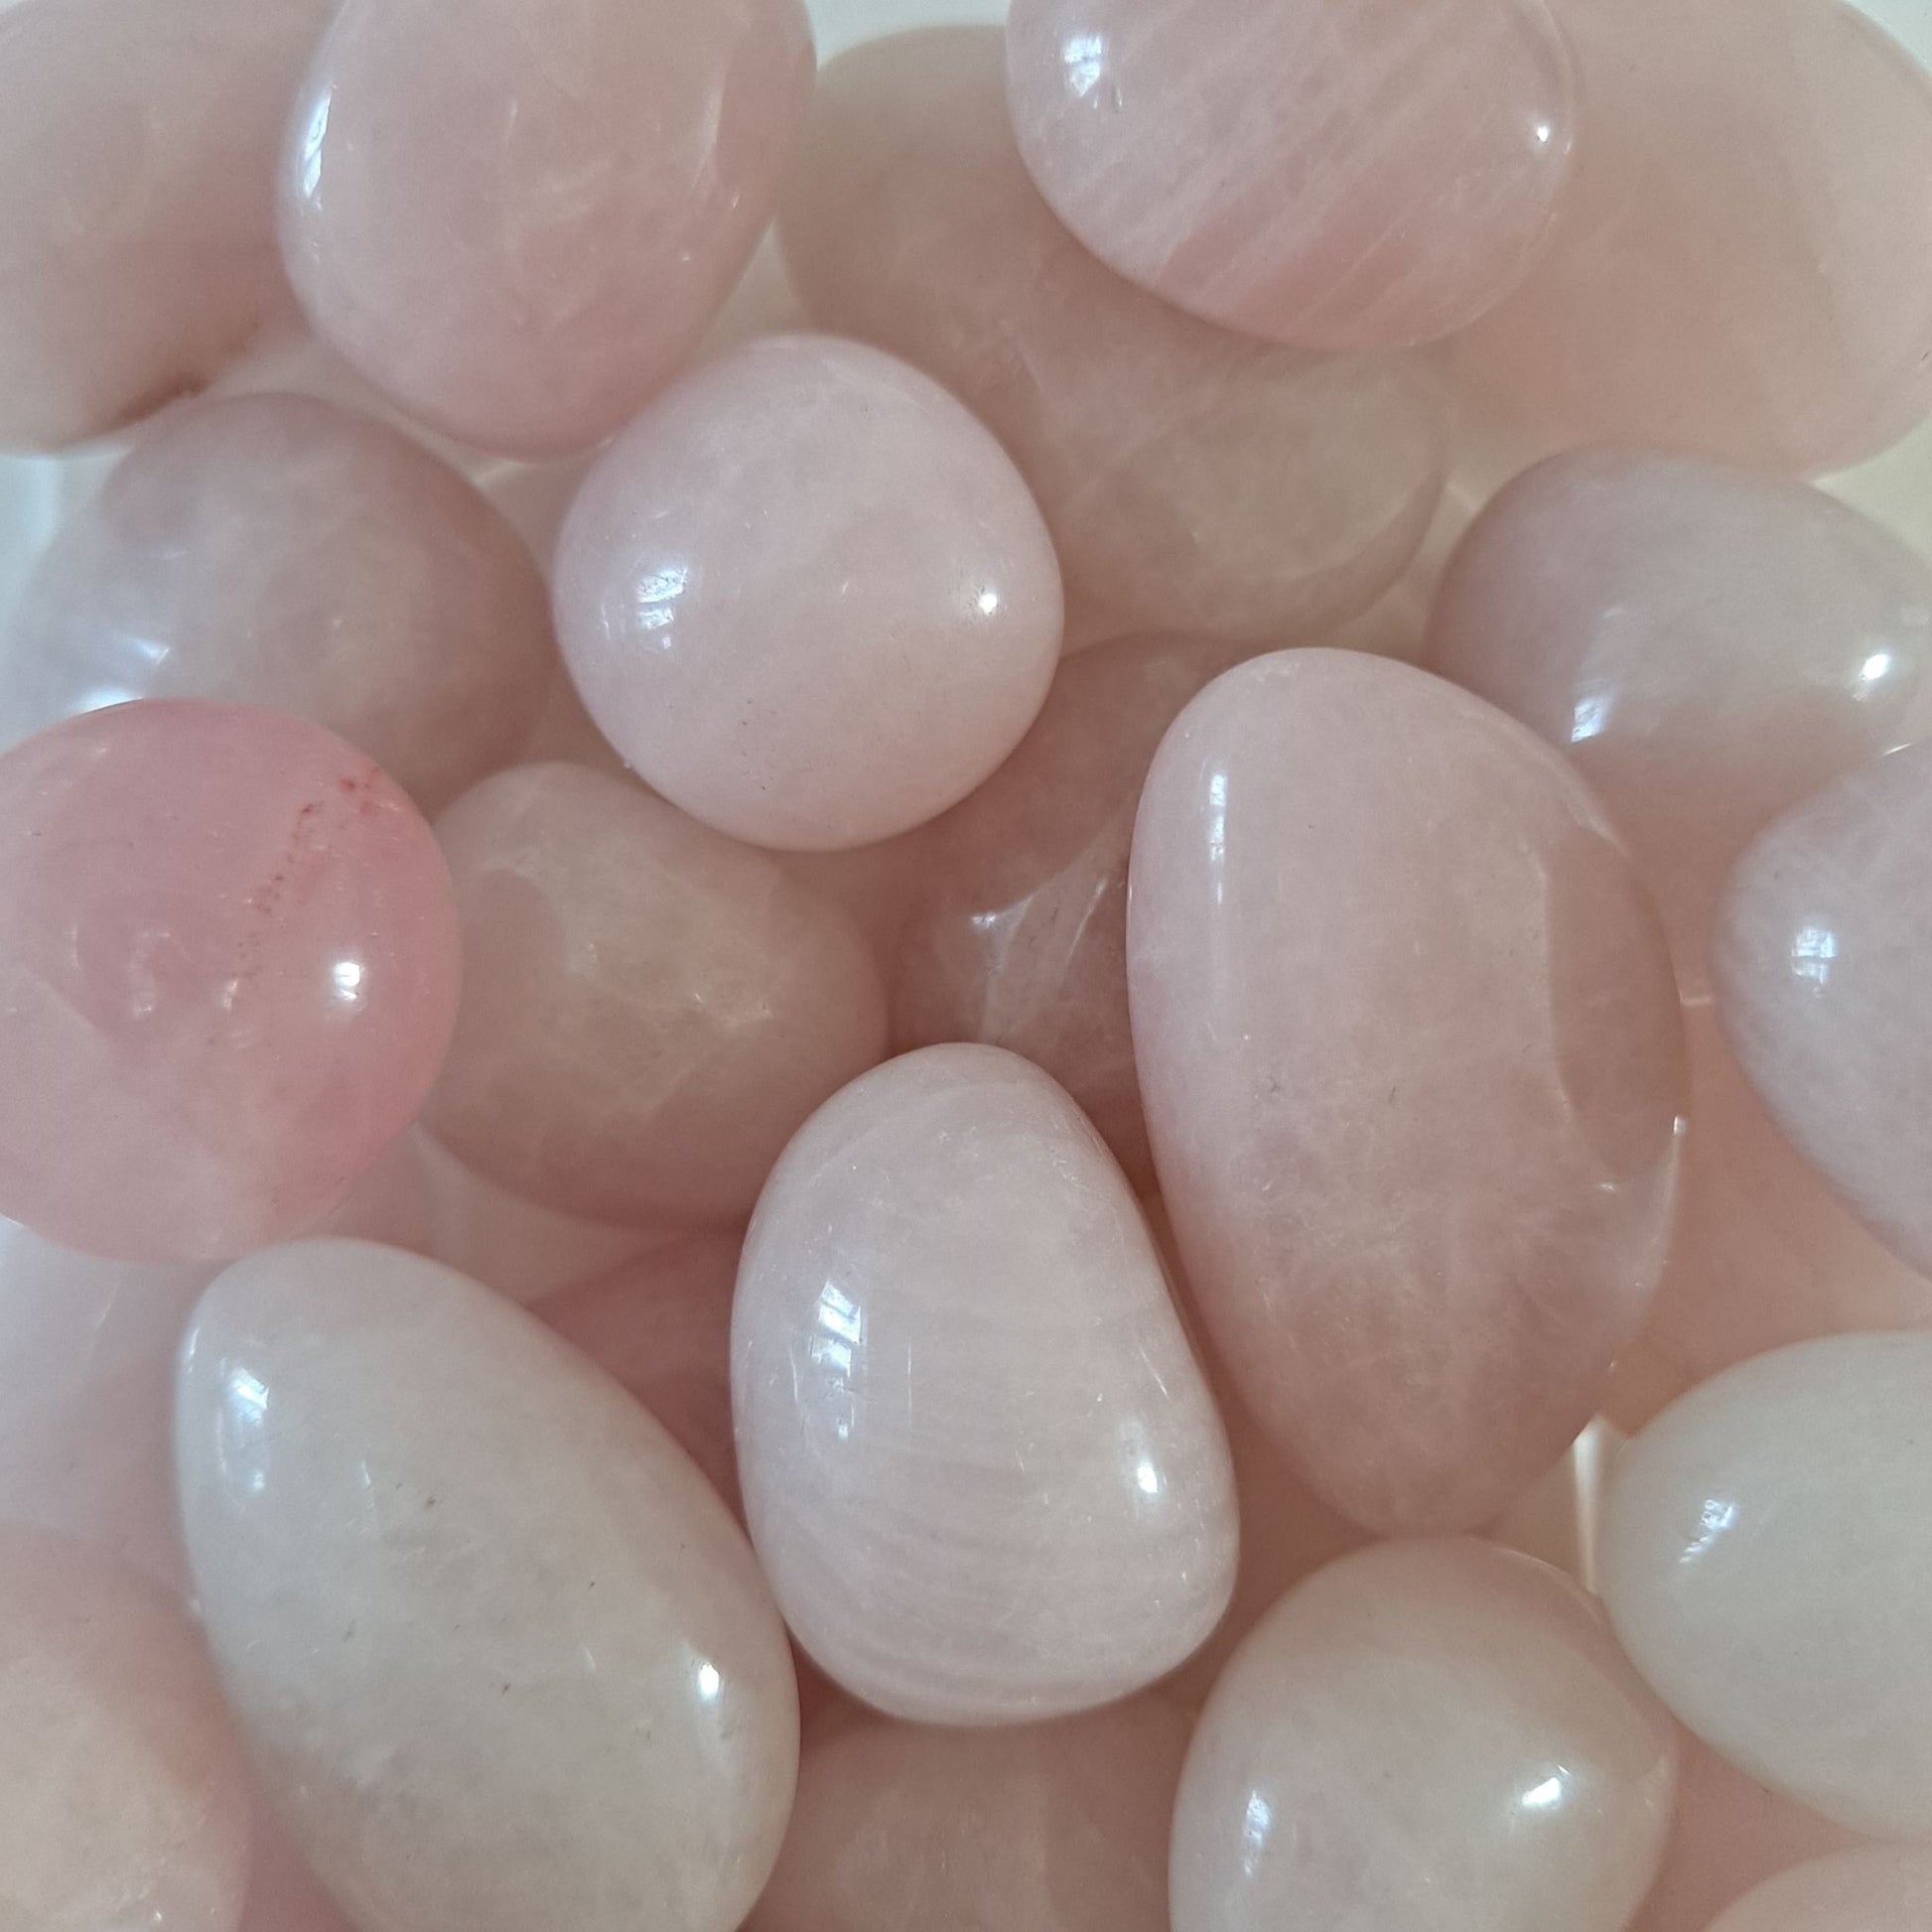 Dumi's Crystals | Rose Quartz Tumbled Stones (Peace & Harmony) | A collection of Rose Quartz Tumbled Stones, reminders of the love within. Rose Quartz fosters compassion, reduces anxiety & promotes inner peace. Scatter them in your home or workspace to create a space overflowing with loving energy and a sense of tranquility. Cultivate a life filled with love and harmony with Rose Quartz.